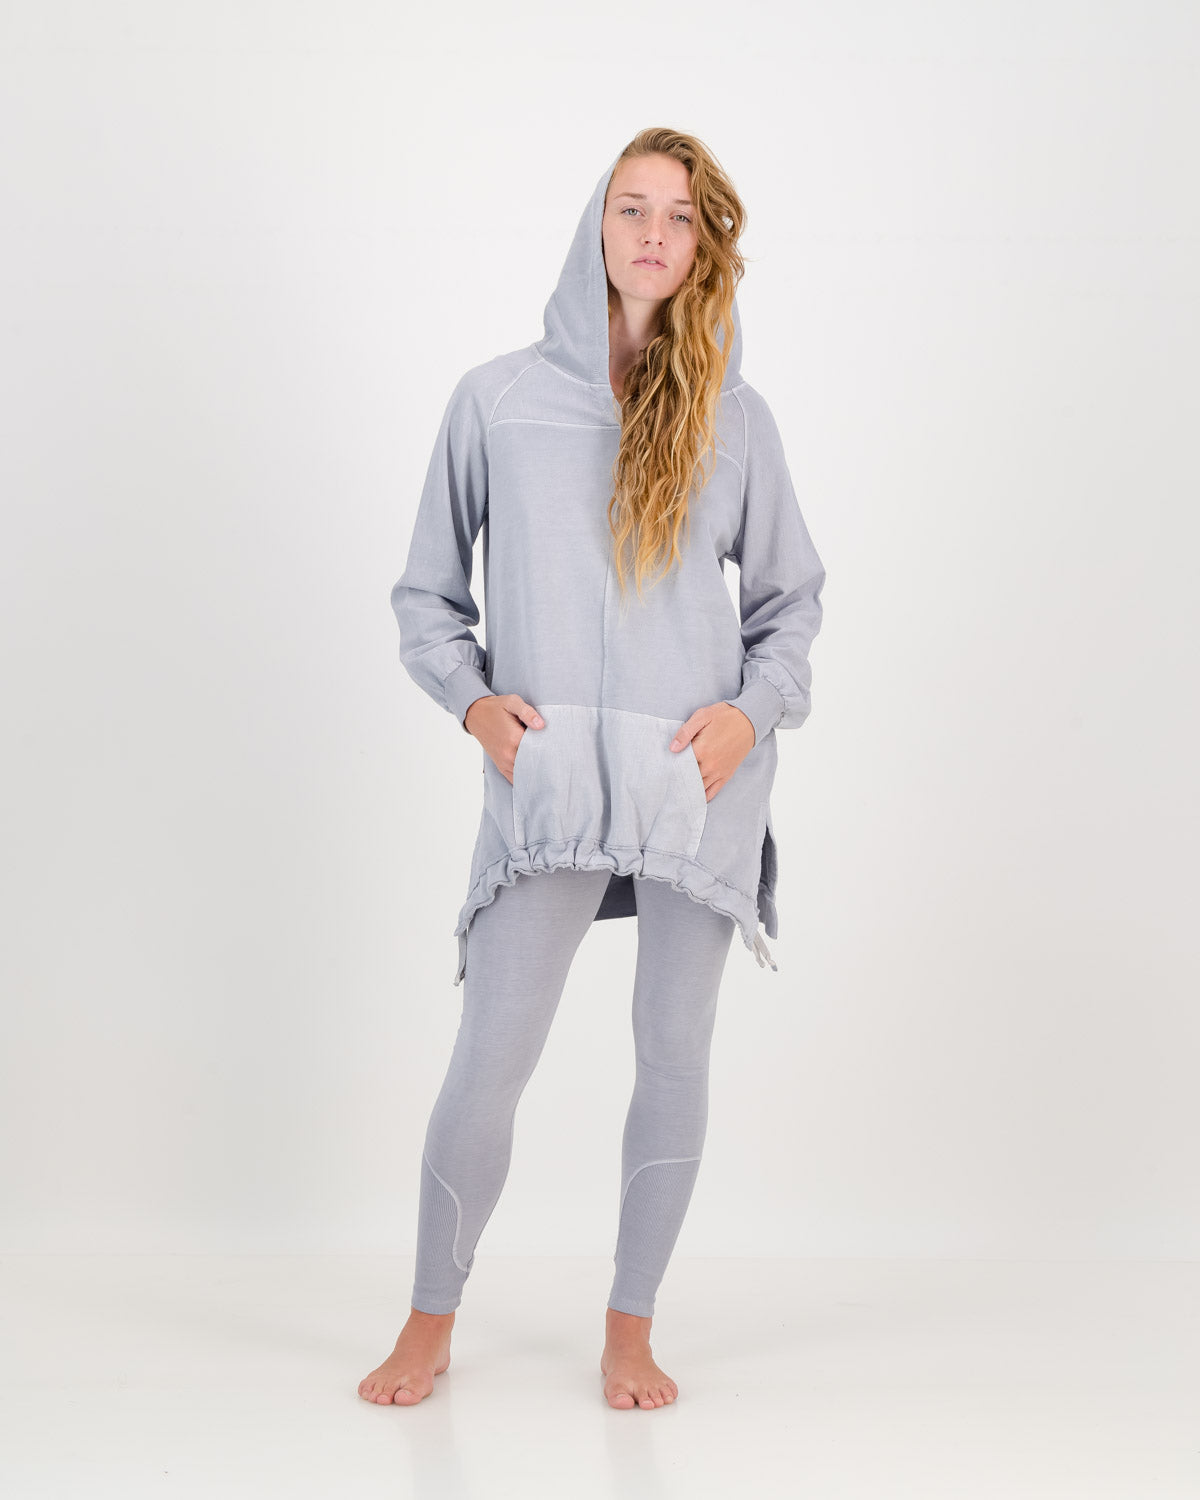 Overdye Cotton silver Leggings with matching silver long hoody